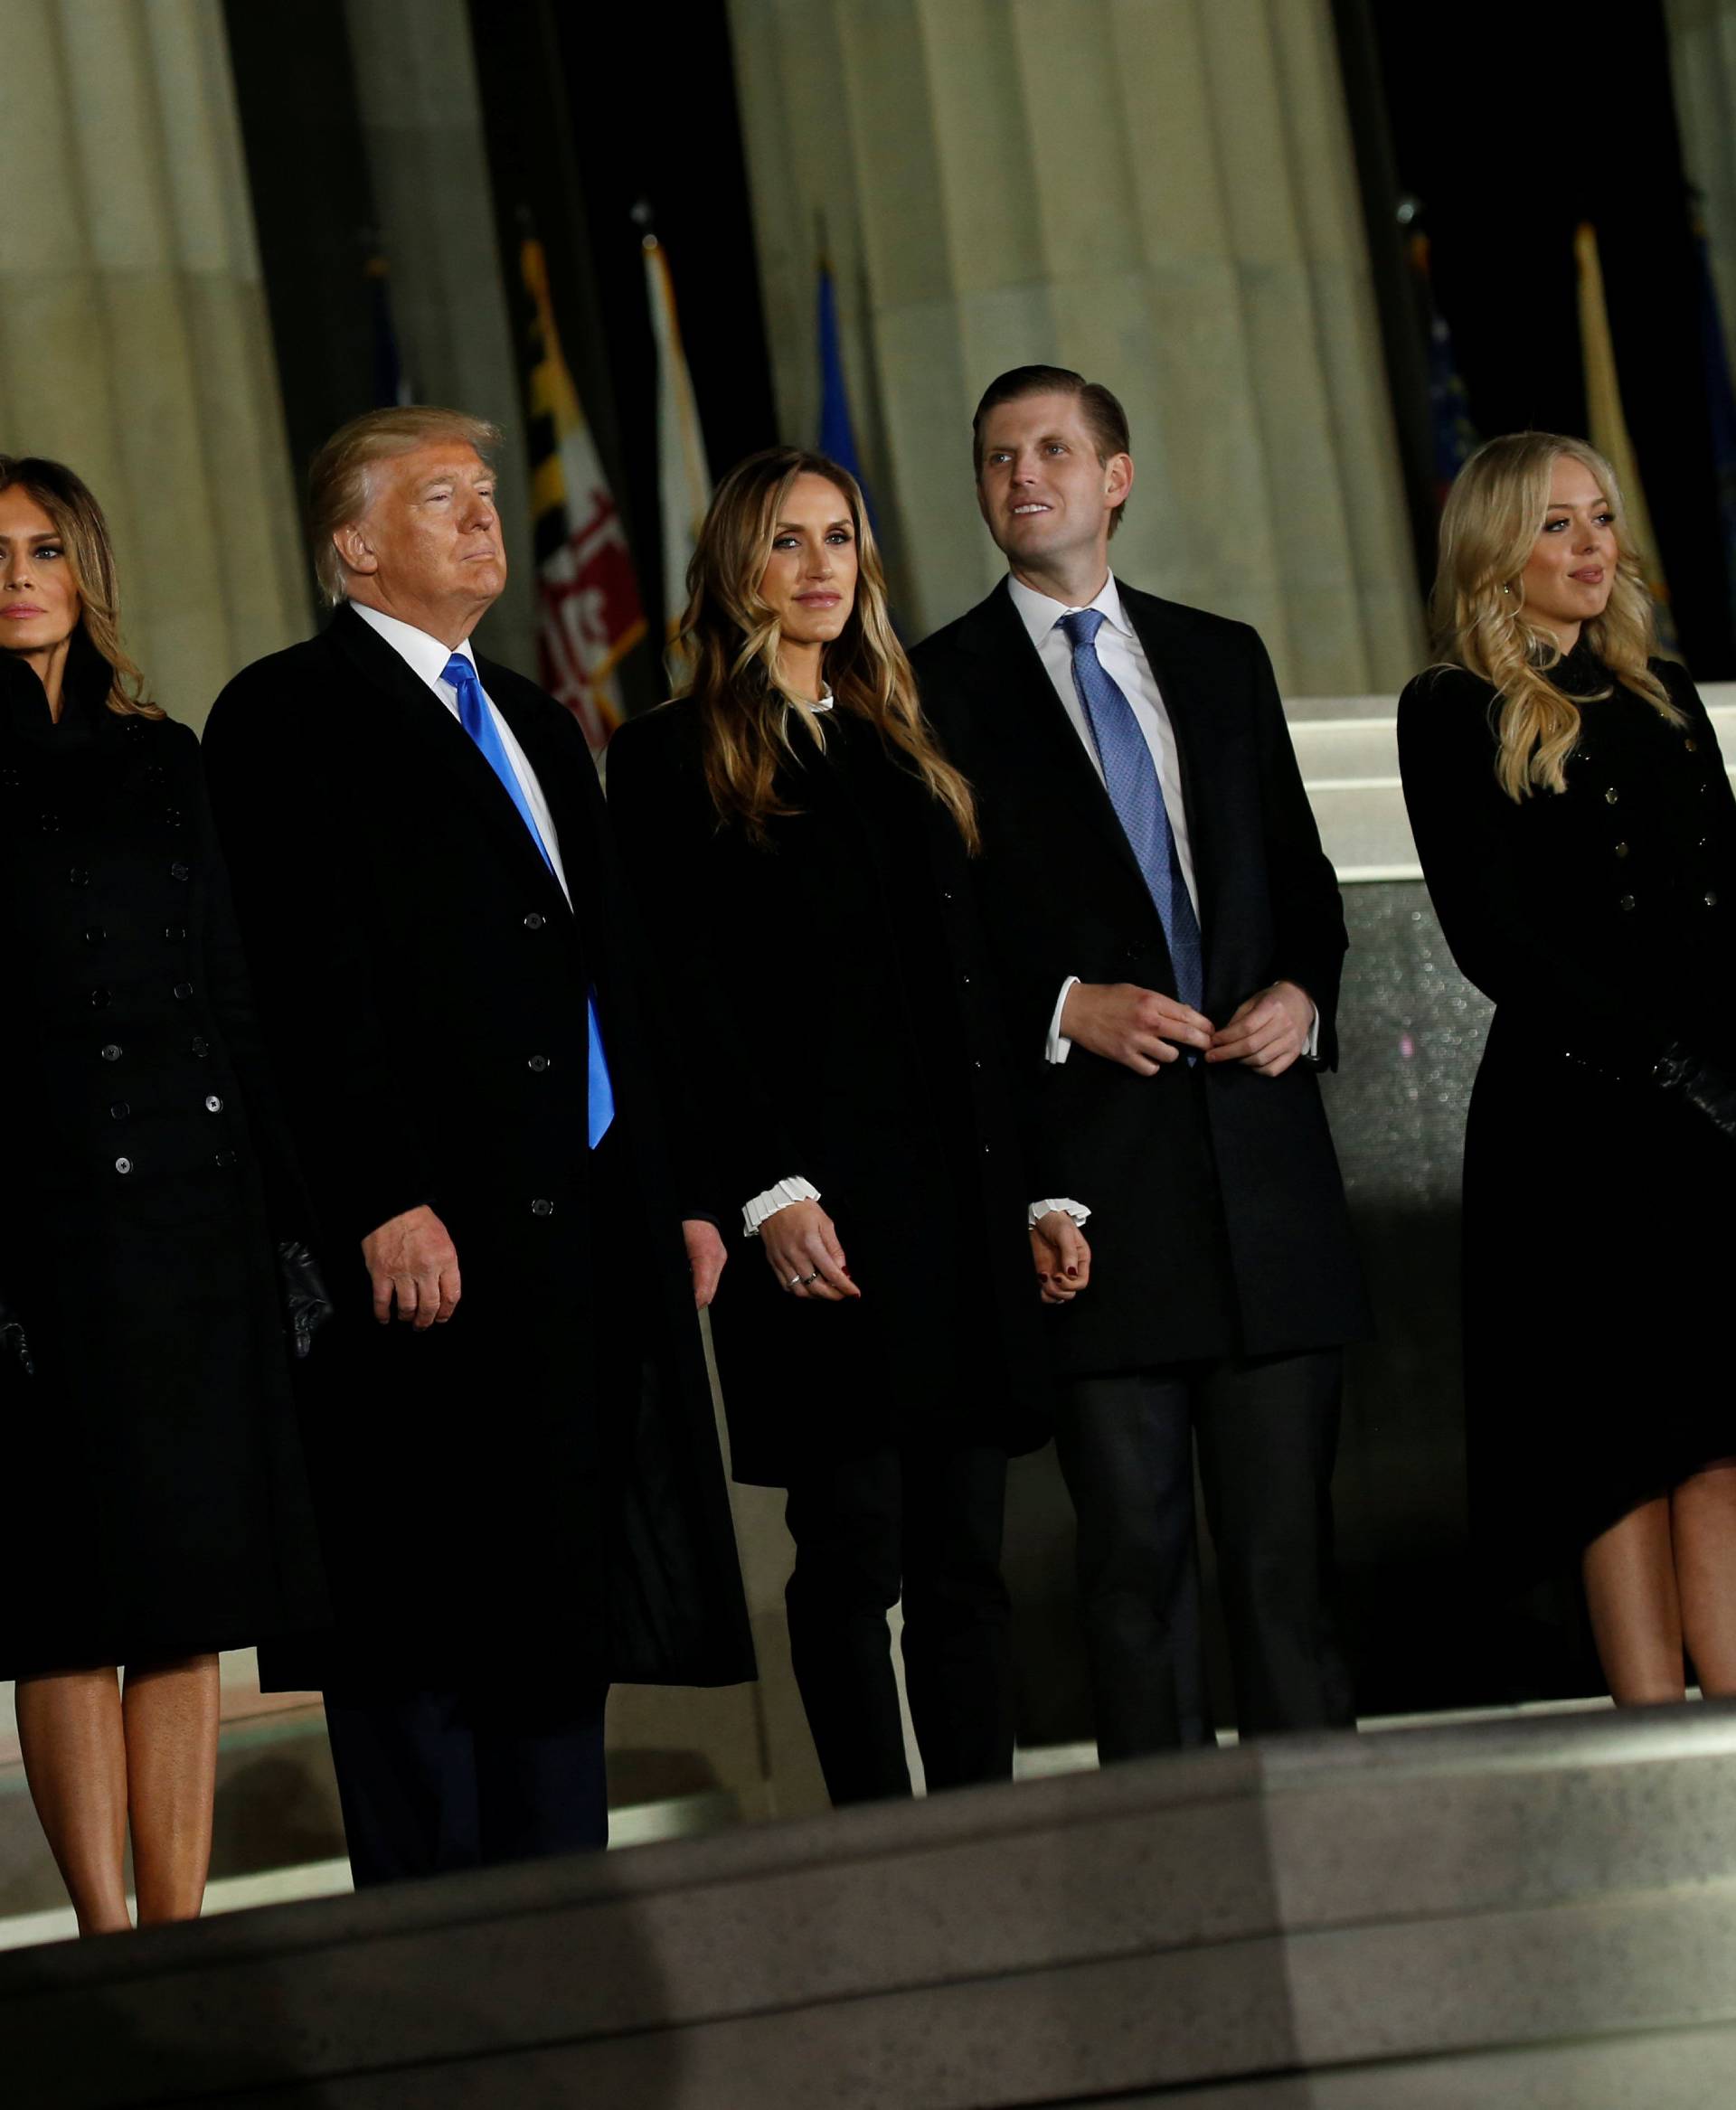 Trump and his family take part in a Make America Great Again welcome concert in Washington